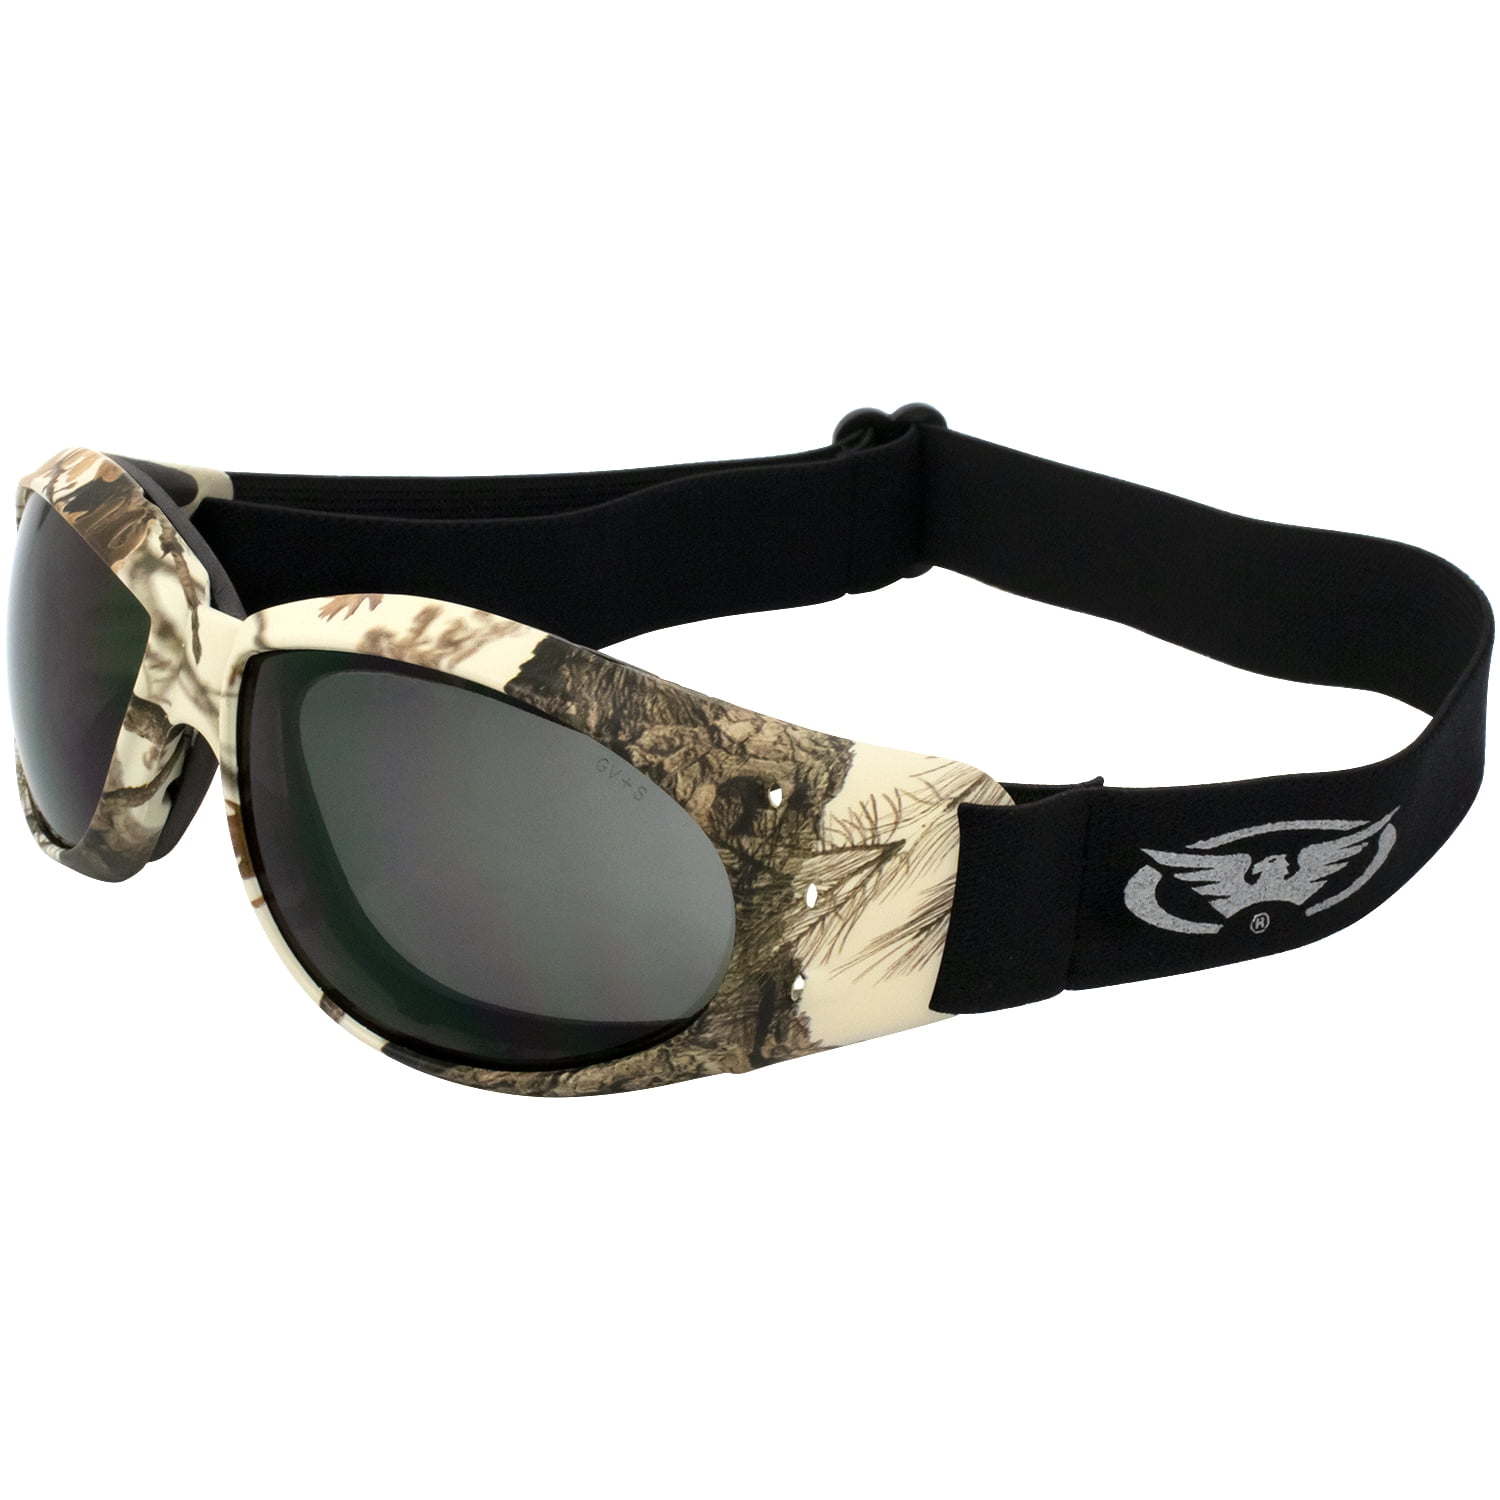 Global Vision Eliminator Z 88 Padded Riding Goggles Pine Camo with Clear Lenses 